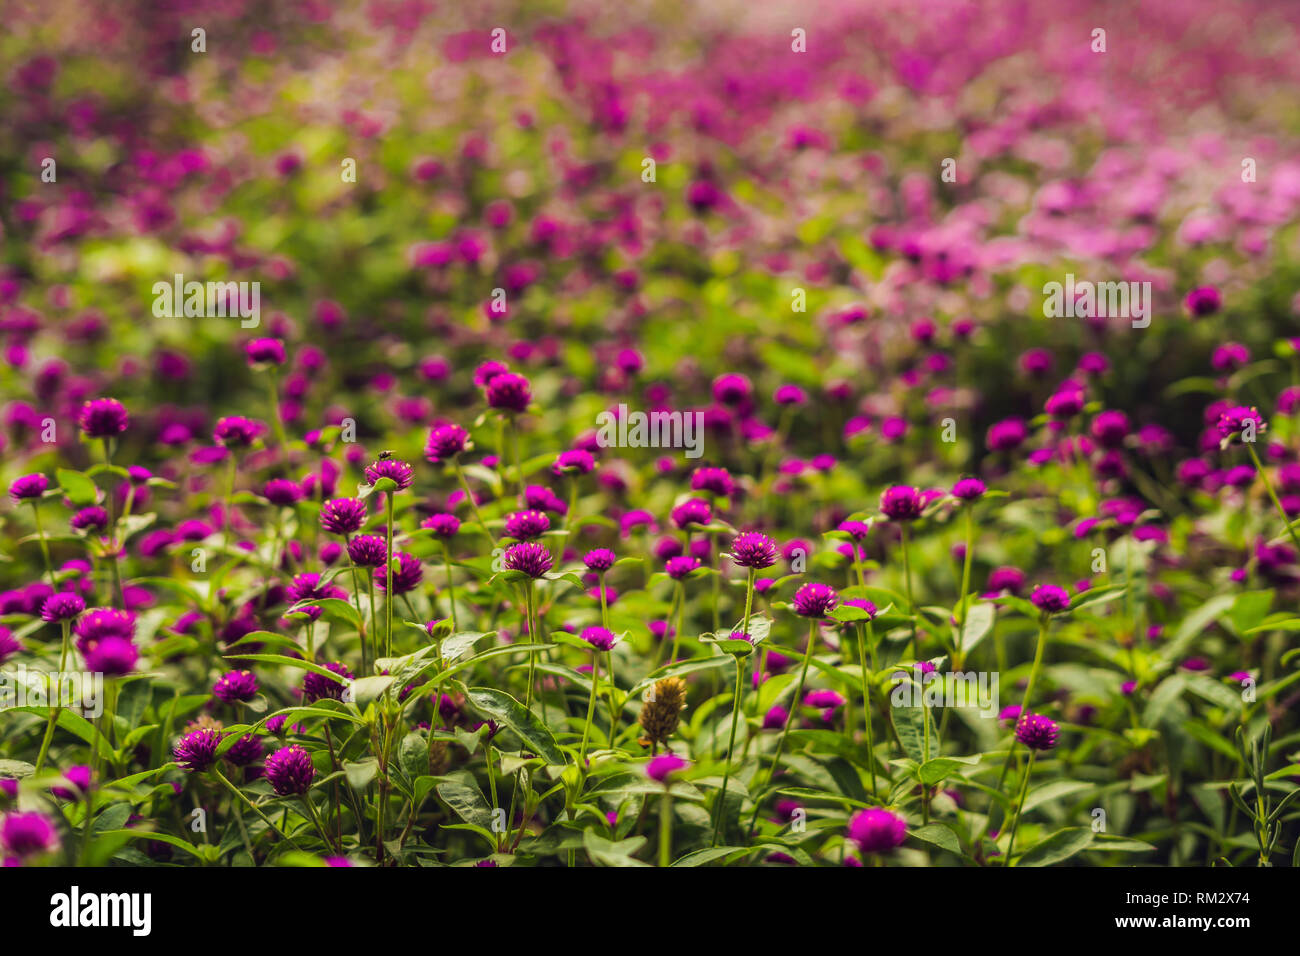 gomphrena globosa or Fireworks Flower is a beautiful pink small flower in garden Stock Photo